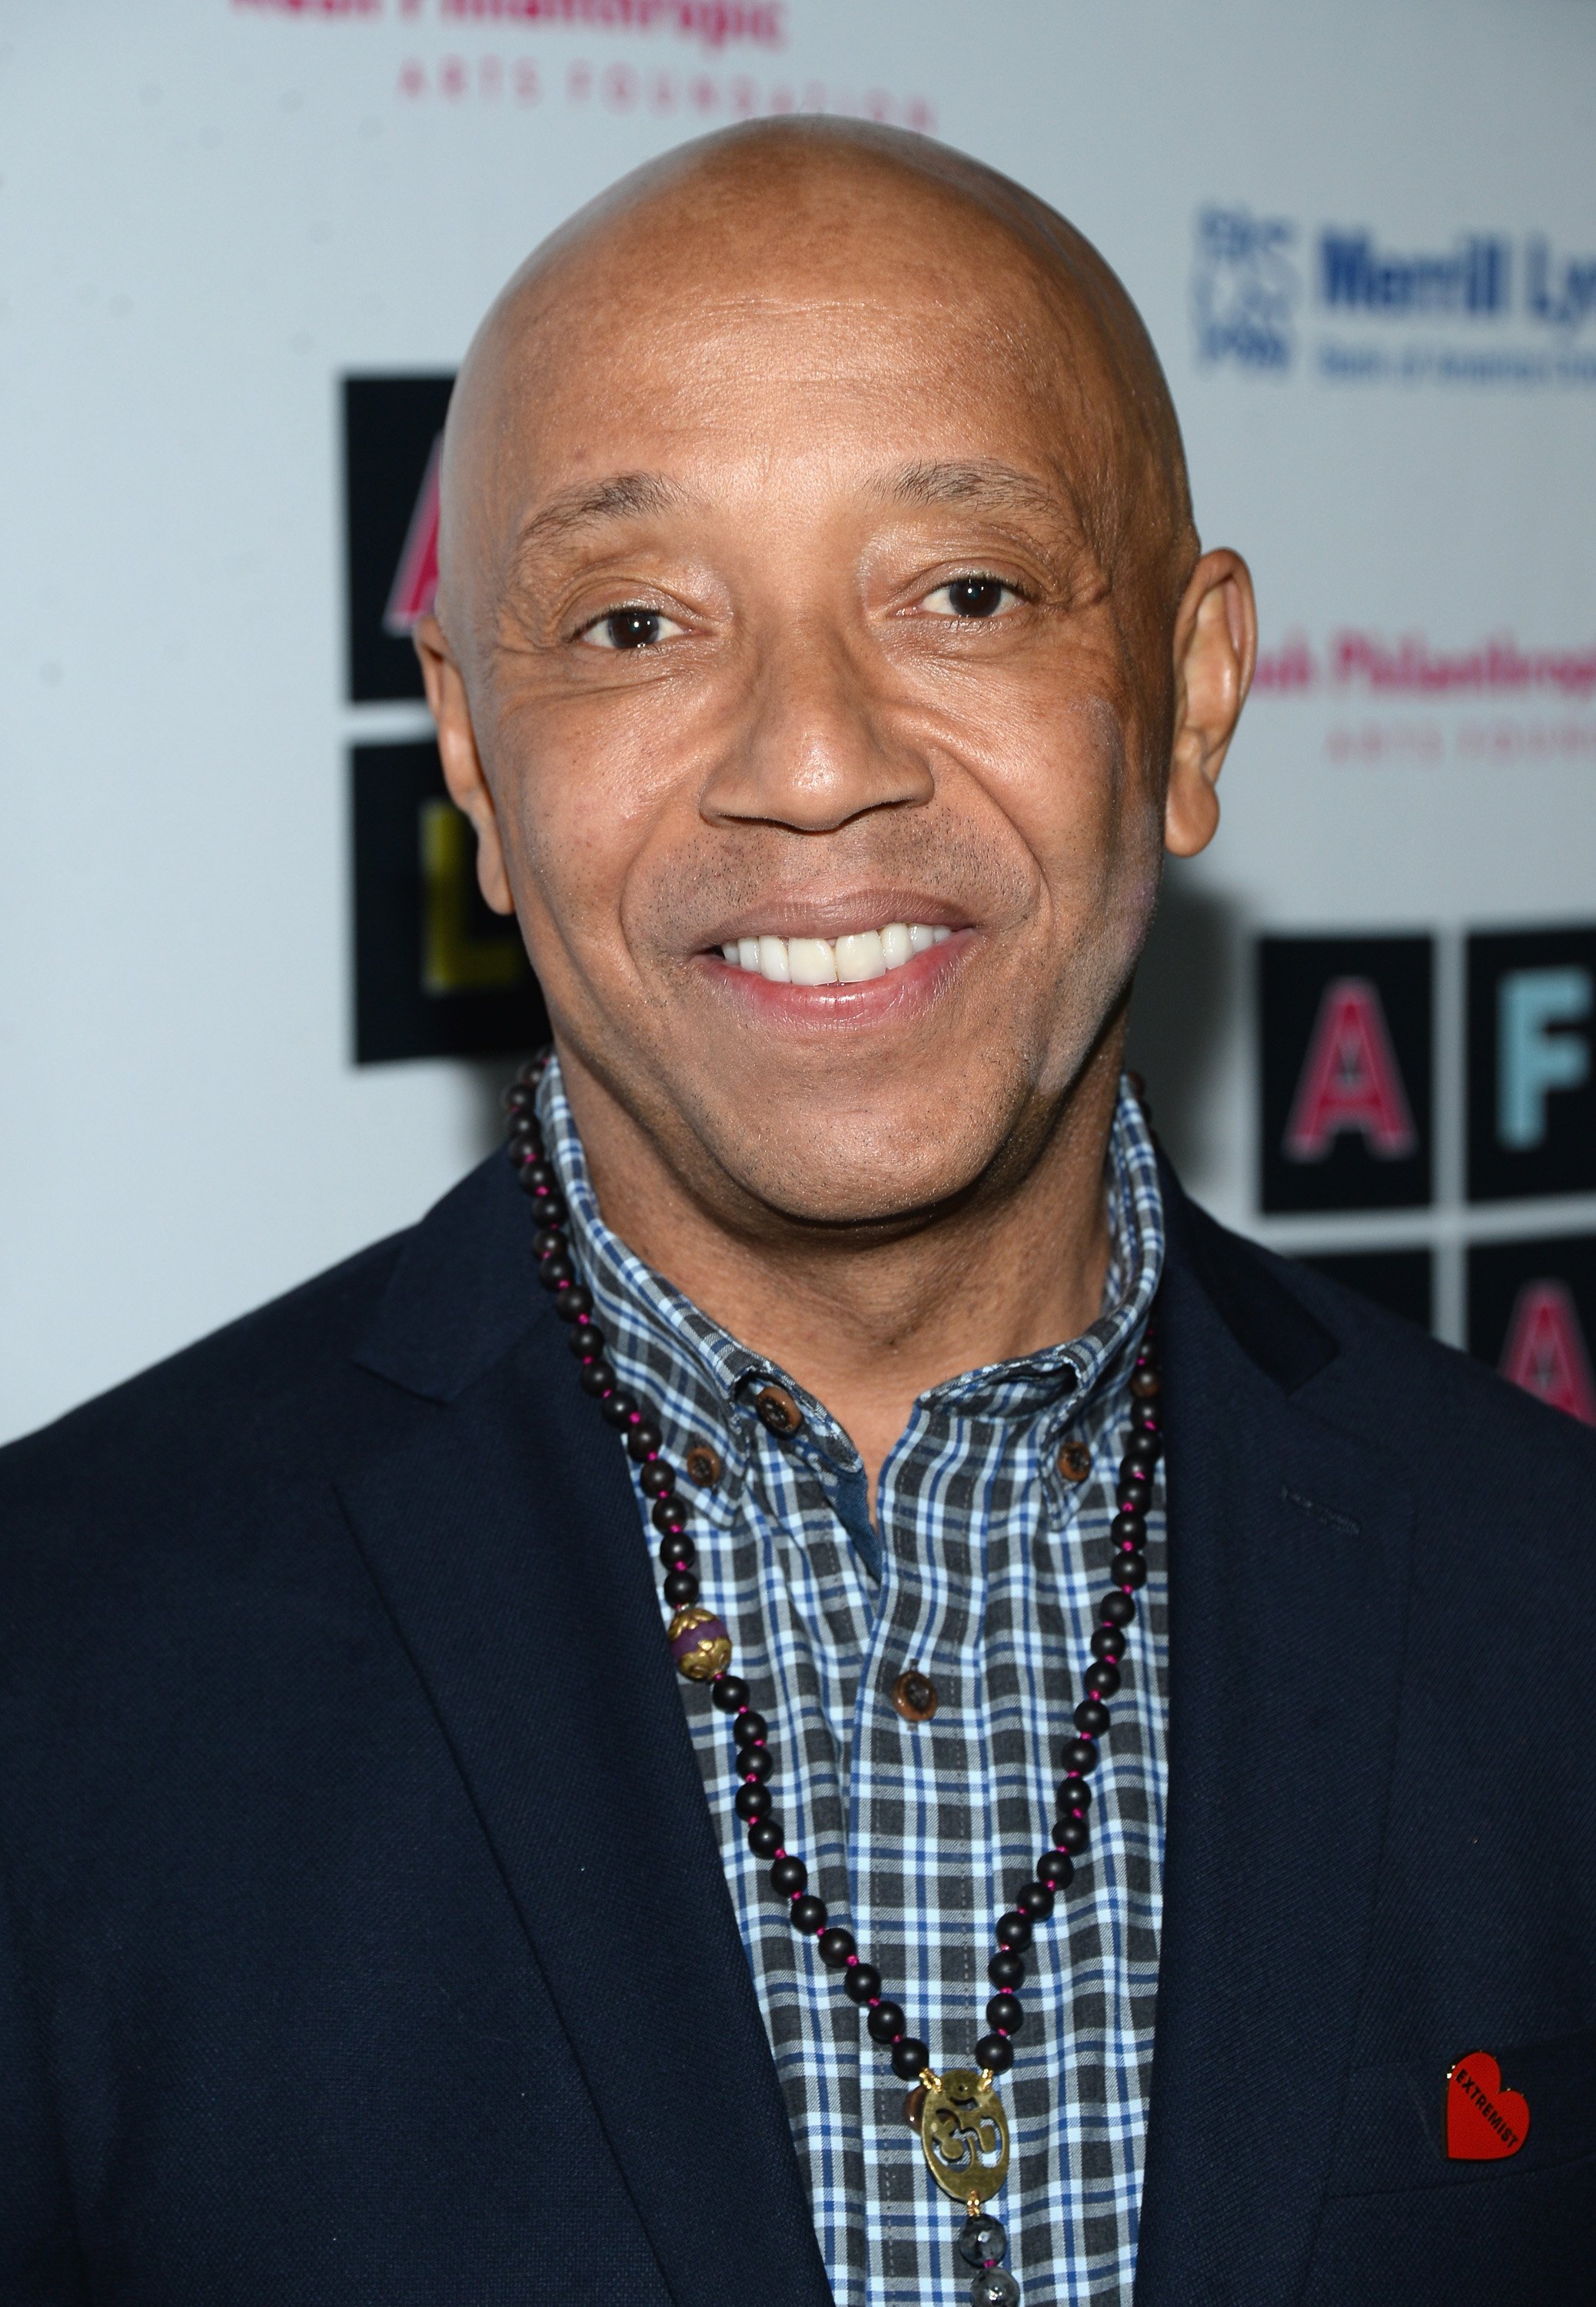 Russell Simmons attending his Rush Philanthropic Arts Foundation's "Art for Life" inauguration in May 2016. | Photo: Getty Images